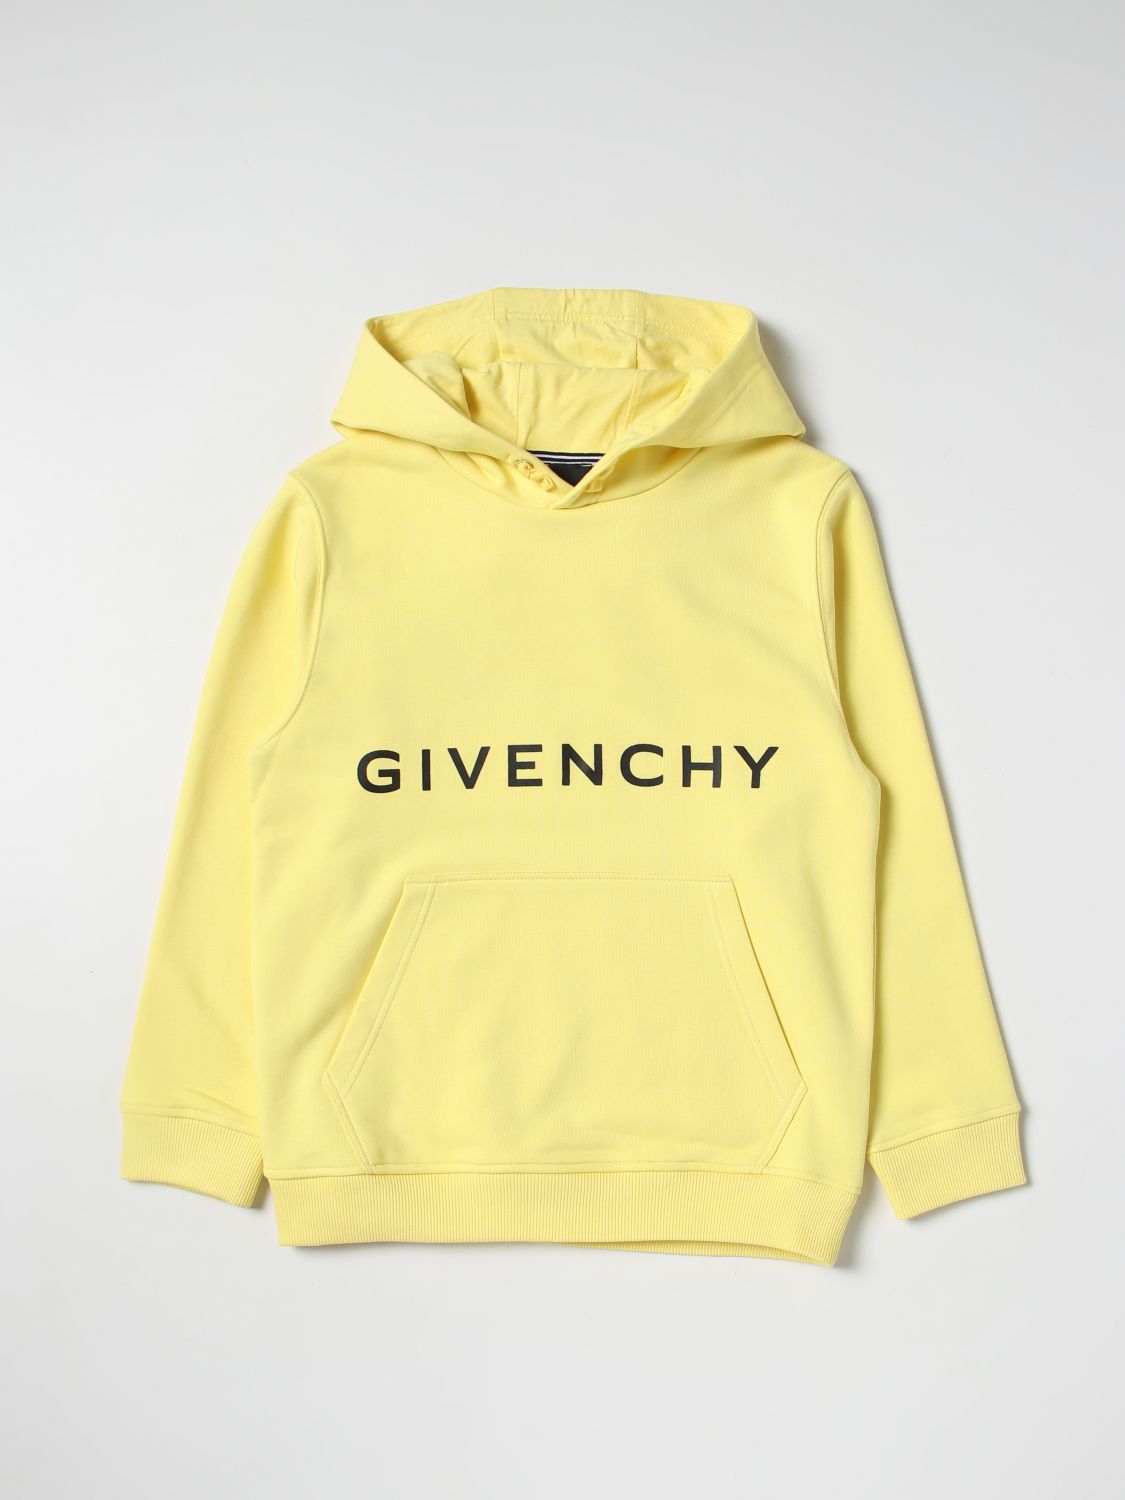 GIVENCHY: sweater for boys - Yellow | Givenchy sweater H25426 online on  